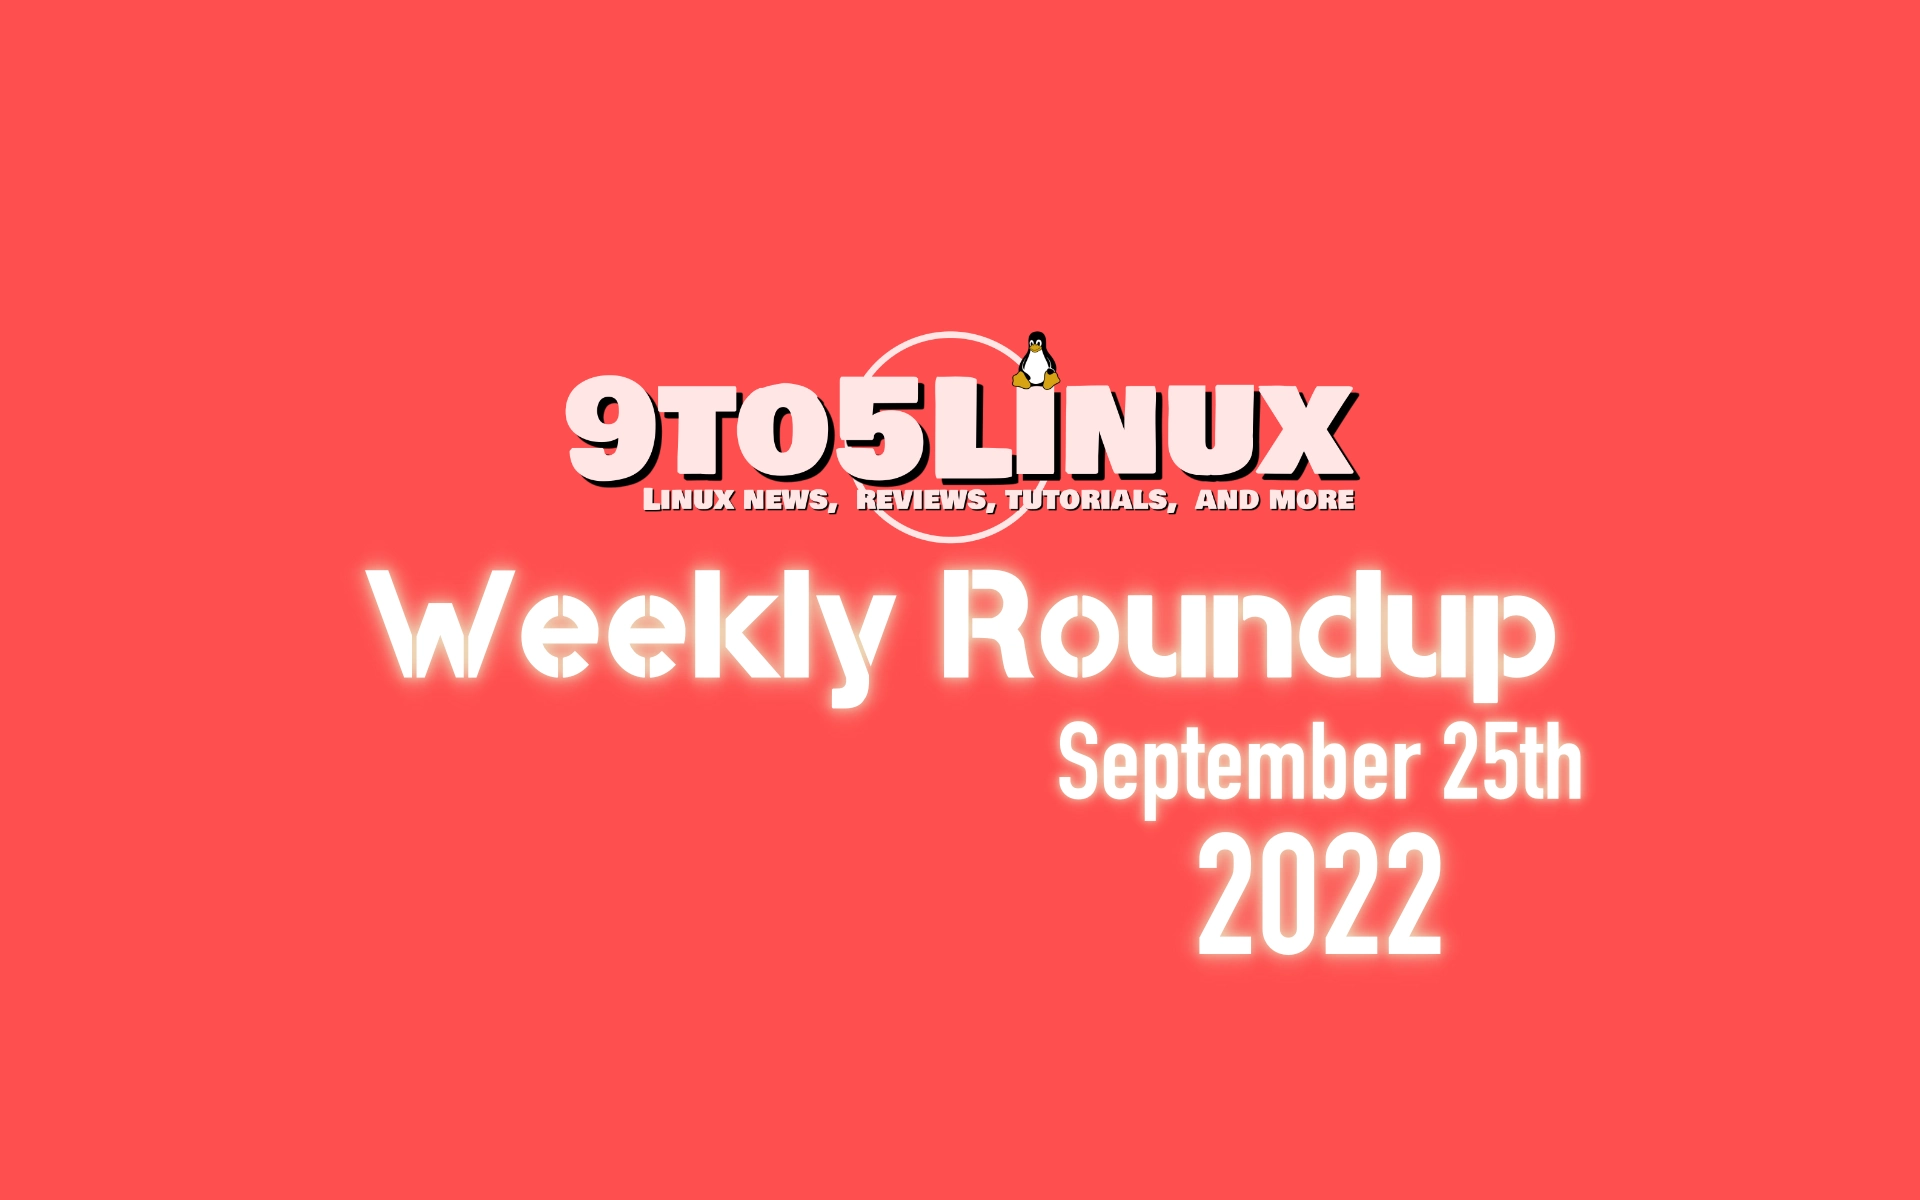 9to5Linux Weekly Roundup: September 25th, 2022